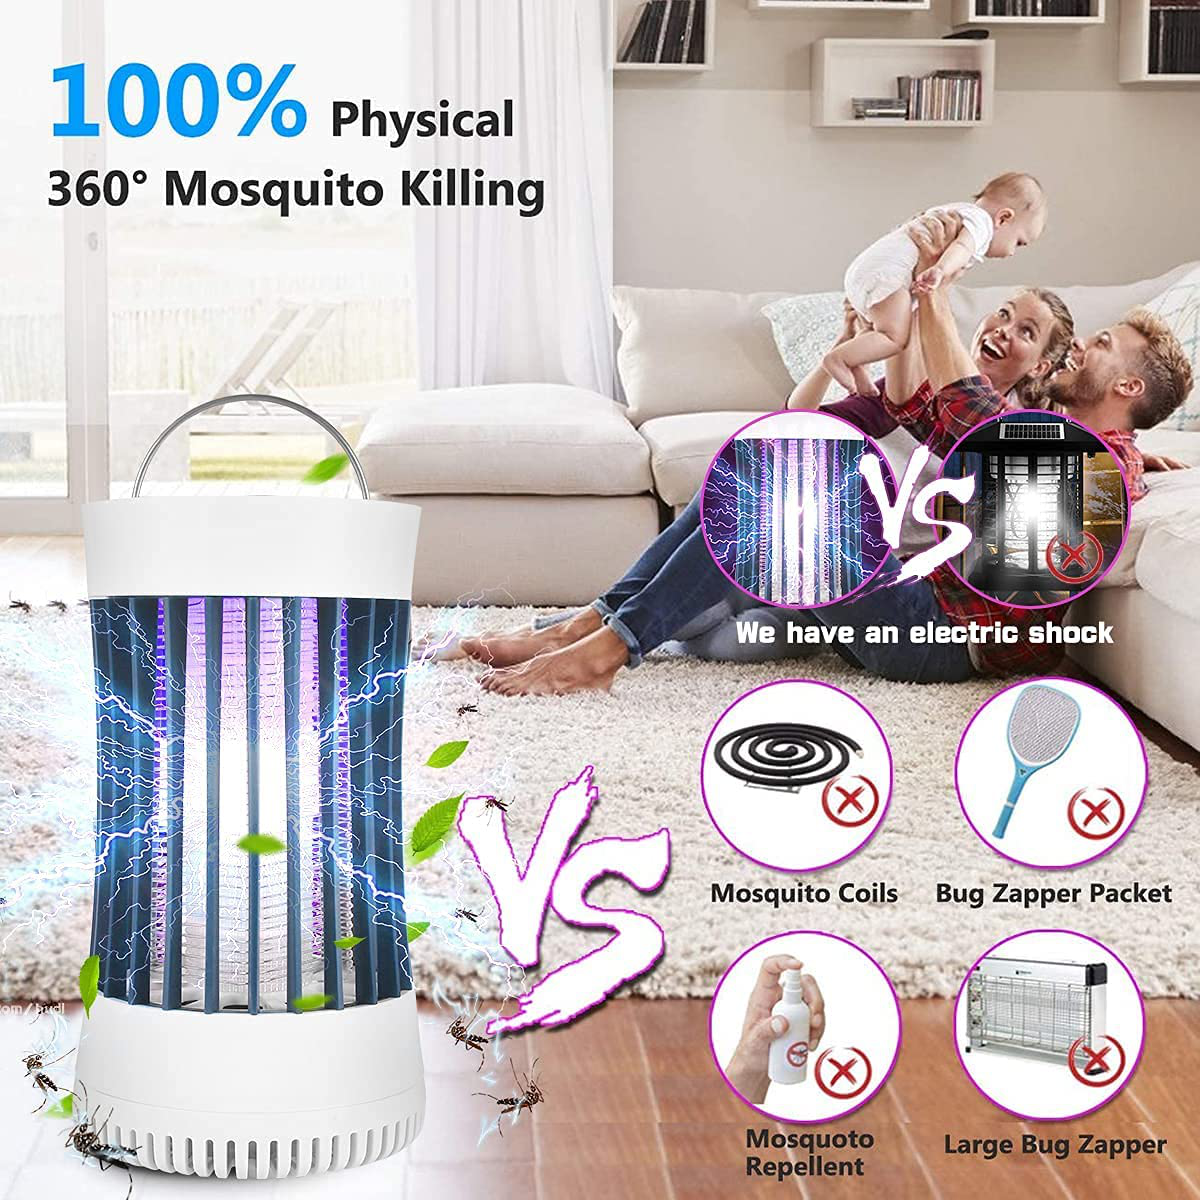 AICase Bug Zapper, USB Rechargeable Indoor & Outdoor Mosquito Killer Trap Lamp Light with 2000mah Battery, Suction Fan, Electric Portable Mosquito Fly Zapper for Home, Camping, Gnats, Backyard, Patio